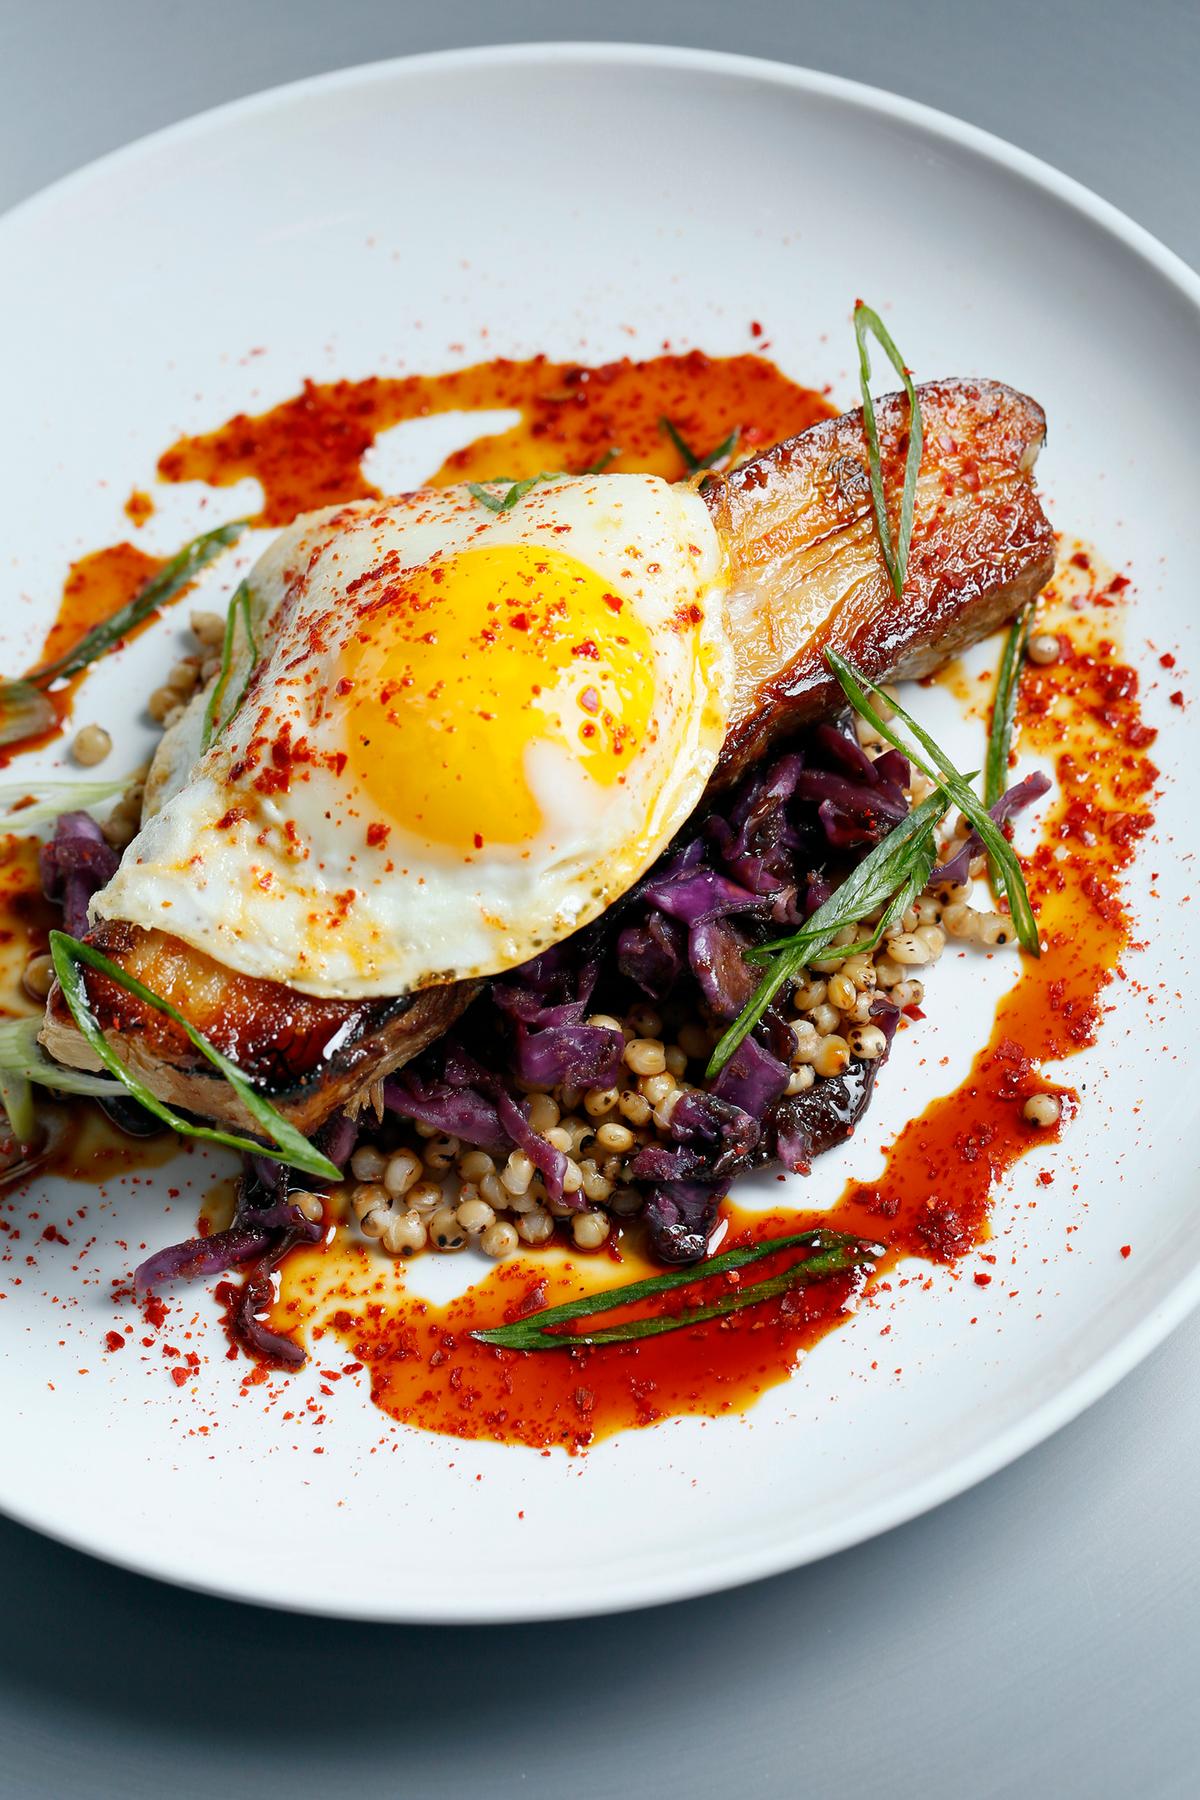 Tinker Street’s Pork Belly with kimchee, forbidden rice, sorghum glaze, and farm egg. (Courtesy of Tinker Street)